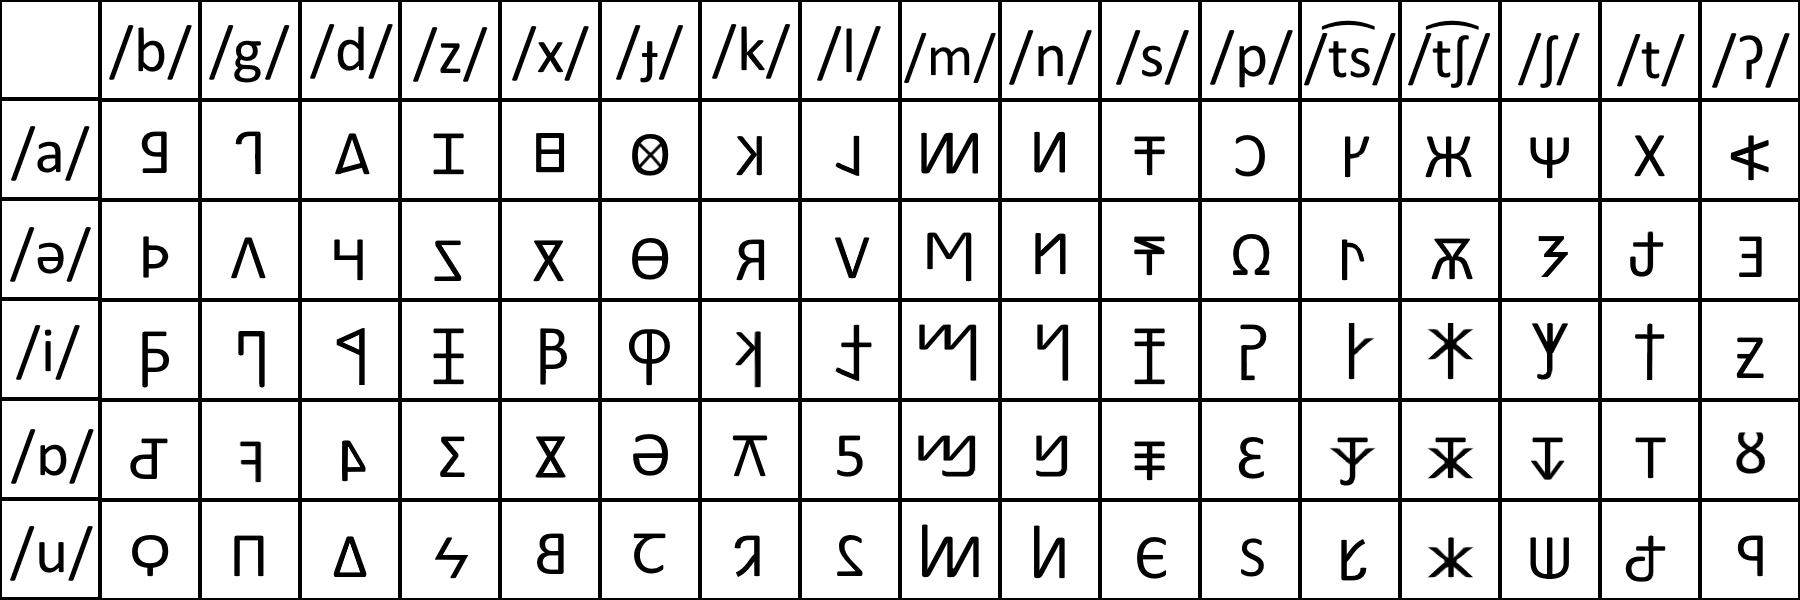 Made A Syllabary Which Is Derived From Phoenician For My New Language Called Polidika Fandom